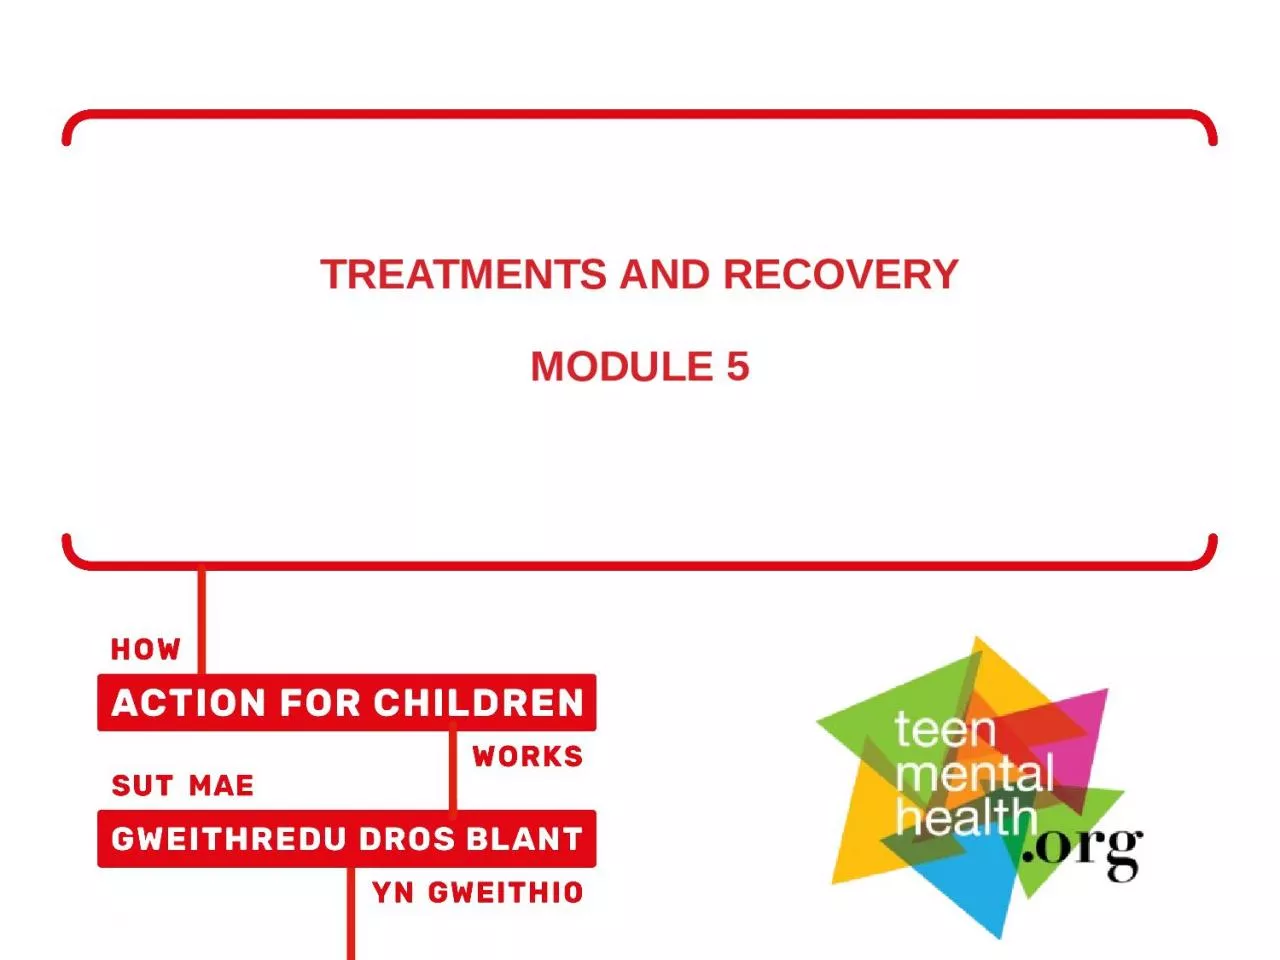 TREATMENTS AND RECOVERY MODULE 5